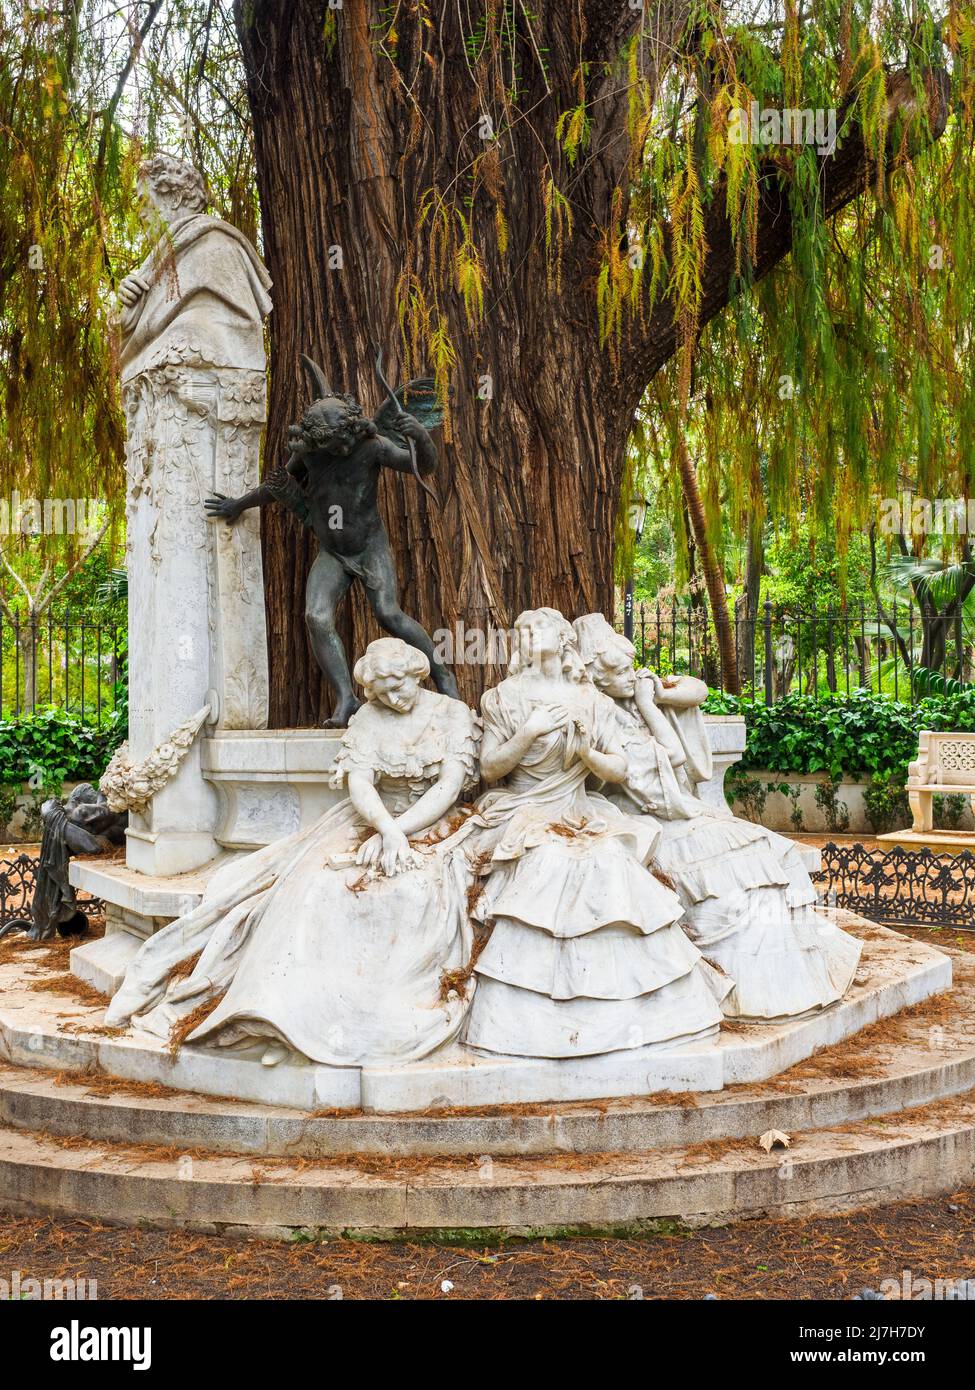 Sculptural group by Lorenzo Coullaut Valera in the  Gustavo Adolfo Bécquer turnaround. The bust of the poet, three female figures seated on a bench symbolizing the three states of love: 'excited love', 'possessed love' and 'lost love', and the bronze statue of Cupid representing 'the love that hurts - Maria Luisa park - Seville, Spain Stock Photo